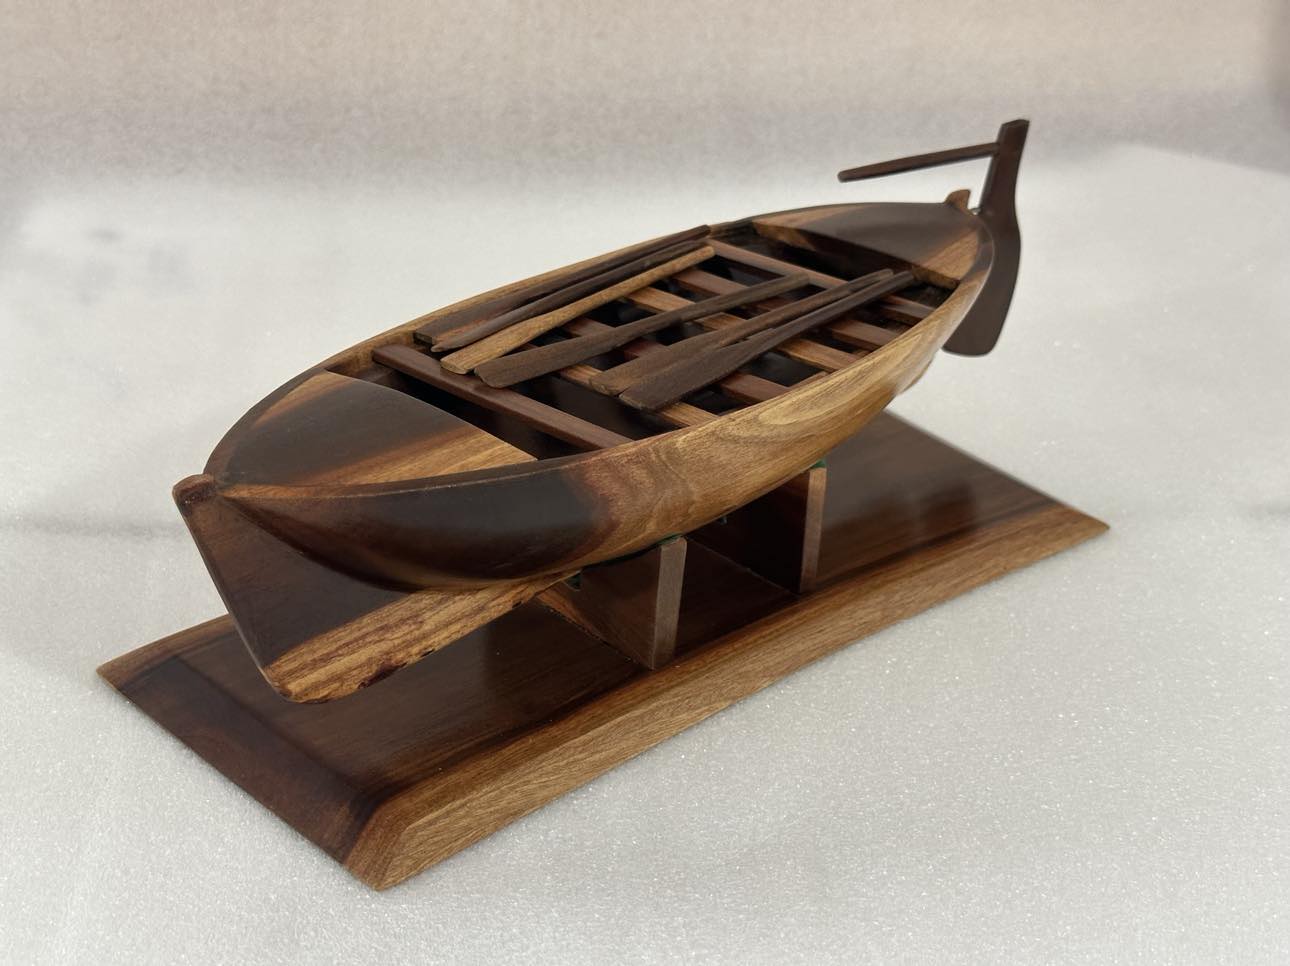 Hand carved Pitcairn Island Long Boat model from local Miro wood